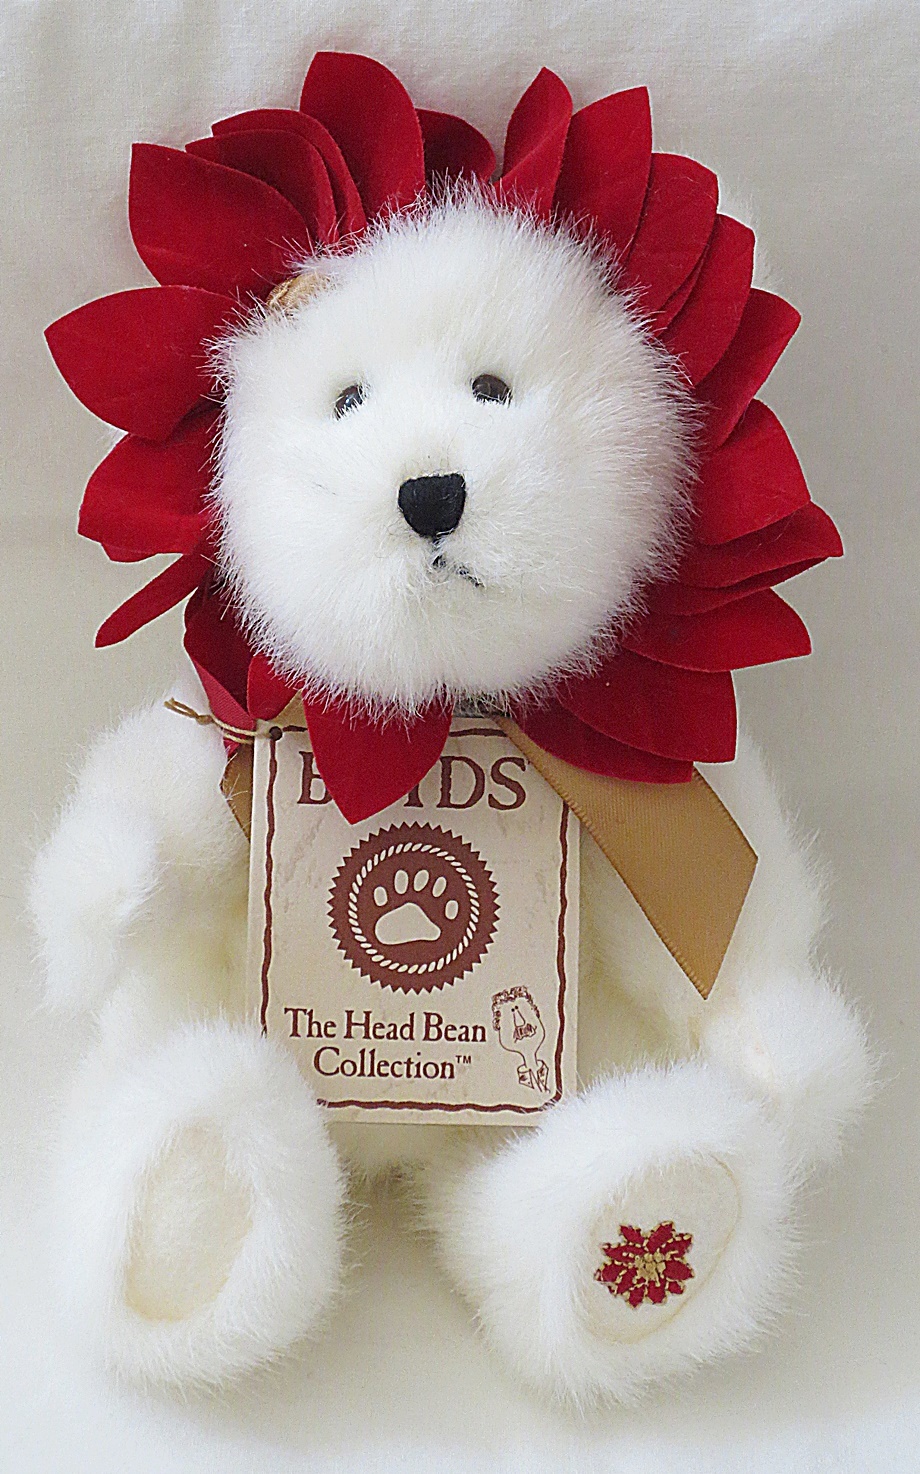 Primary image for Boyds Bears Holiday 8-inch Plush Bear (Hallmark Gold Crown)